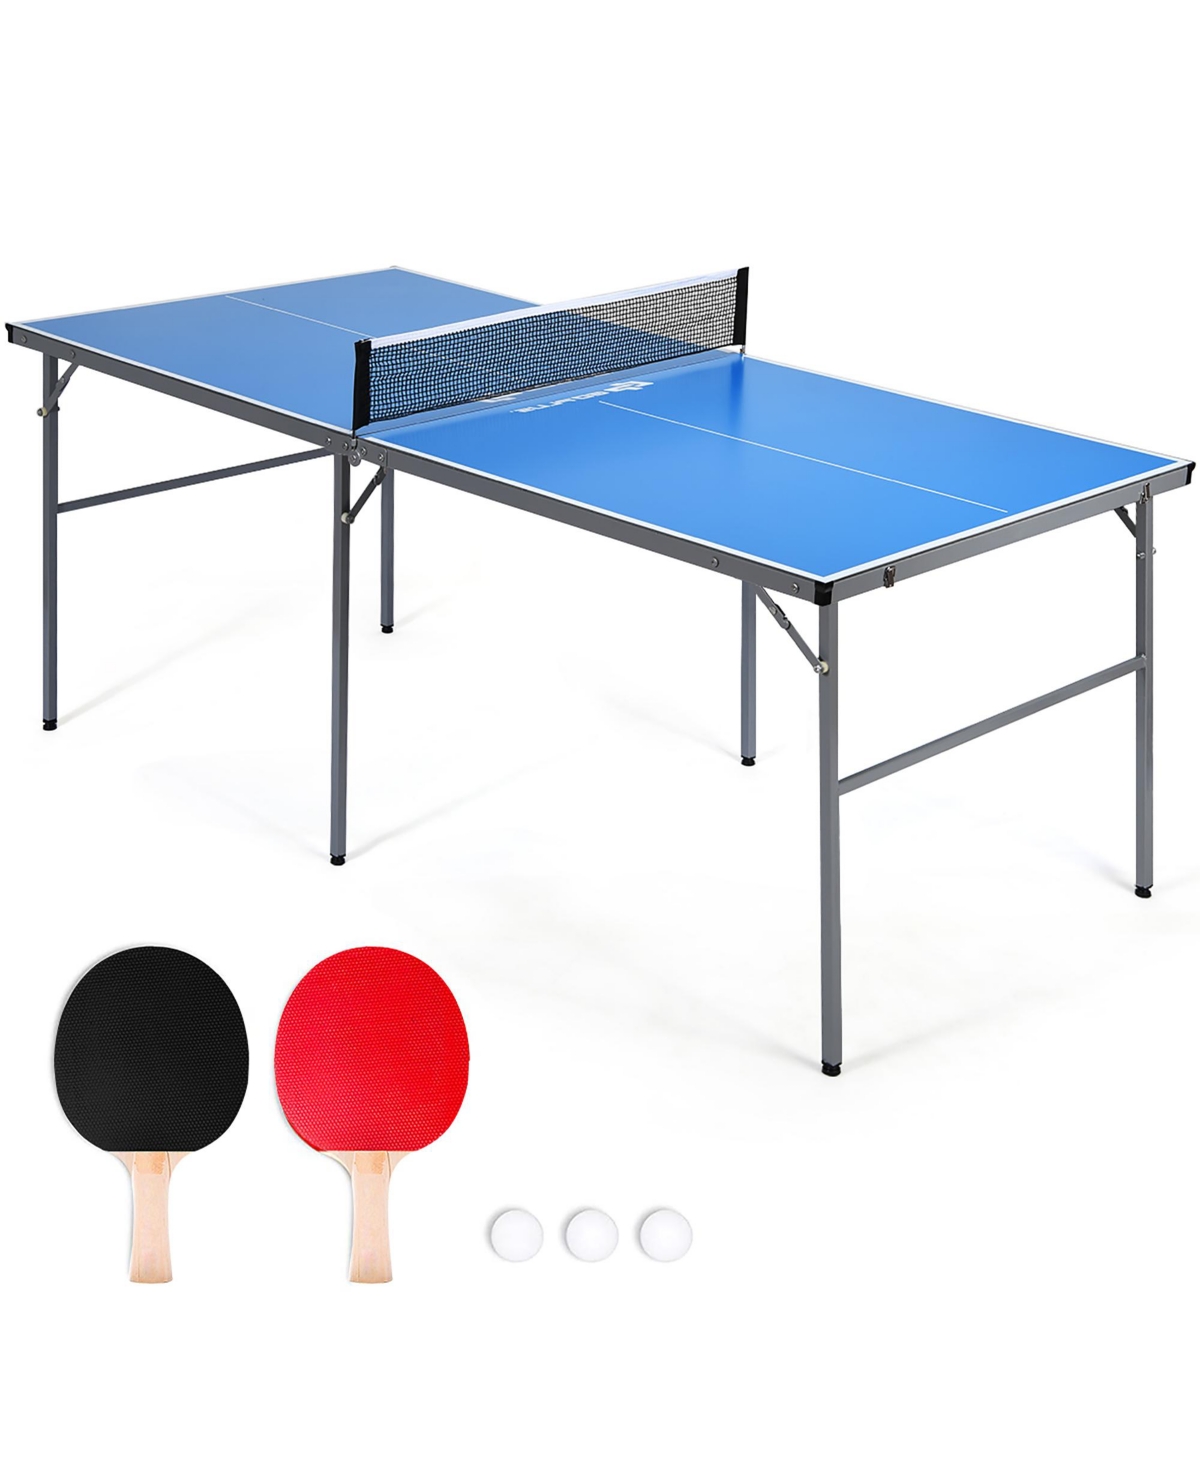 6 x3 Portable Tennis Ping Pong Folding Table w/Accessories - Blue